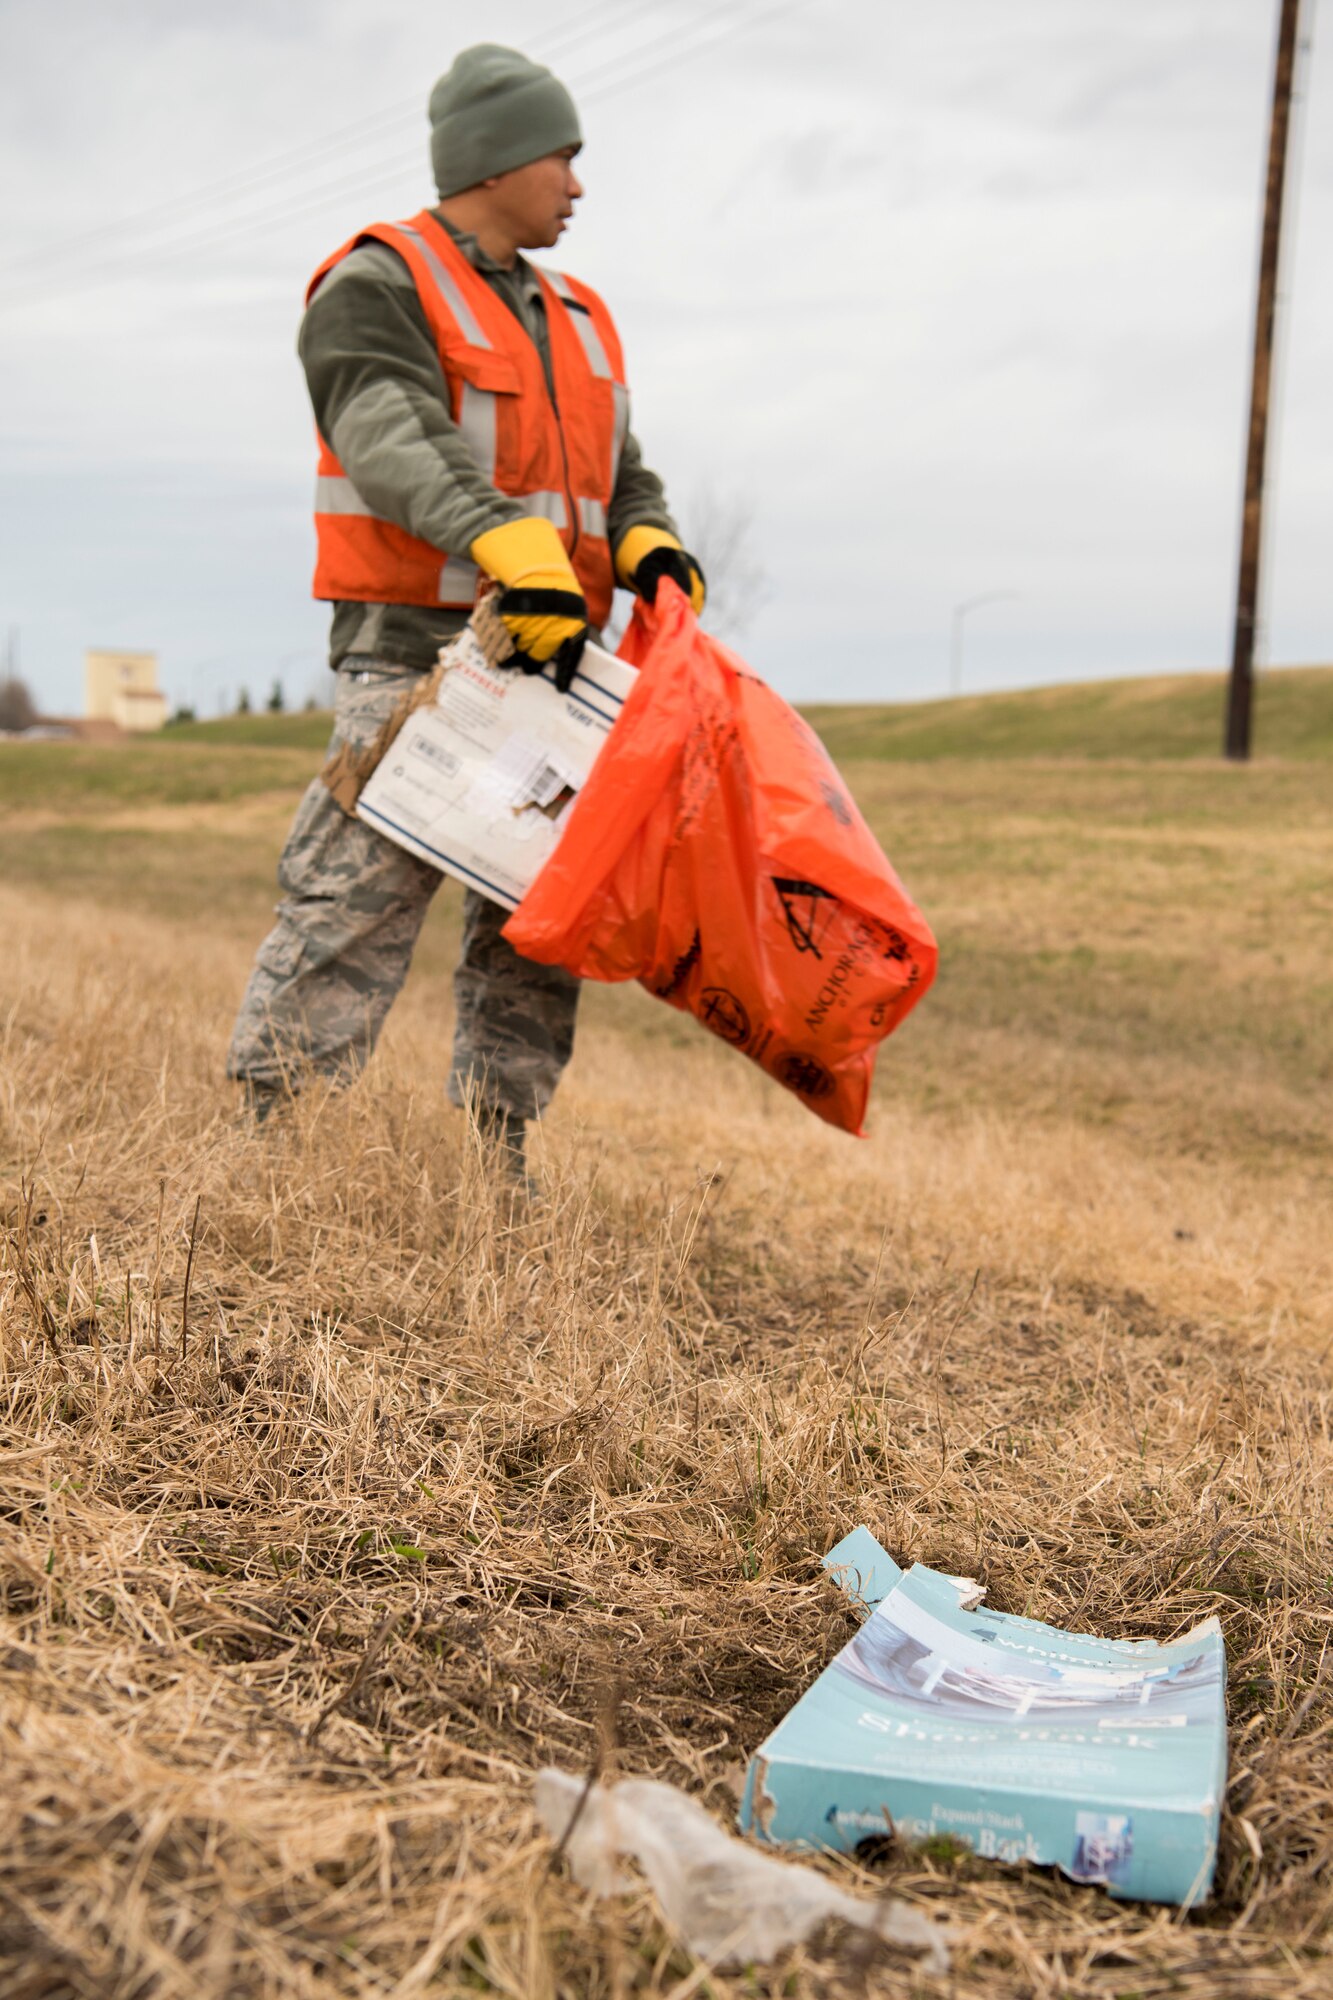 Air Force Staff Sgt. Marlon Lotoc, 773d Civil Engineer Squadron electrical craftsman picks up trash and debris as he walks down a road at Joint Base Elmendorf-Richardson, Alaska, May 4, 2018. JBER participated in Operation Clean Sweep in support of the Anchorage Chamber of Commerce's 50th Annual Citywide Cleanup campaign.